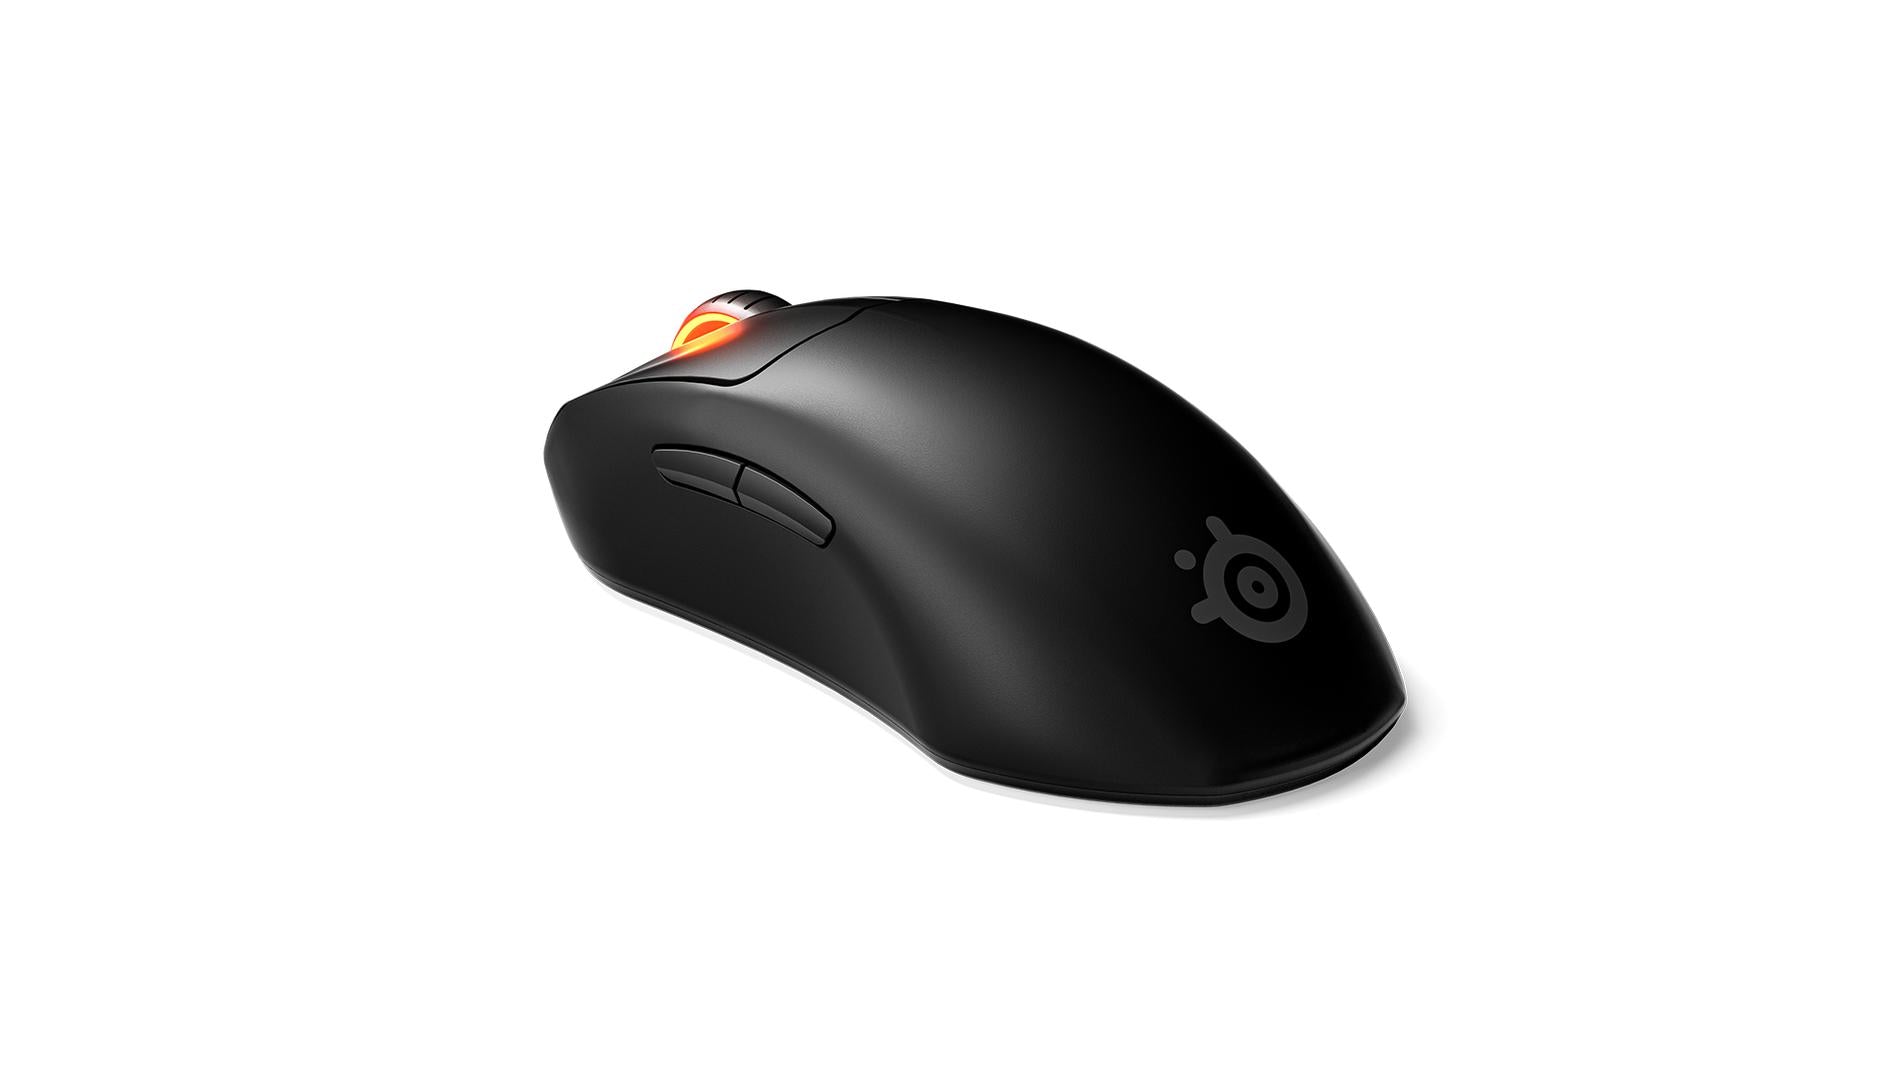 STEELSERIES 62426 PRIME MINI WIRELESS GAMING MOUSE-MOUSE-Makotek Computers